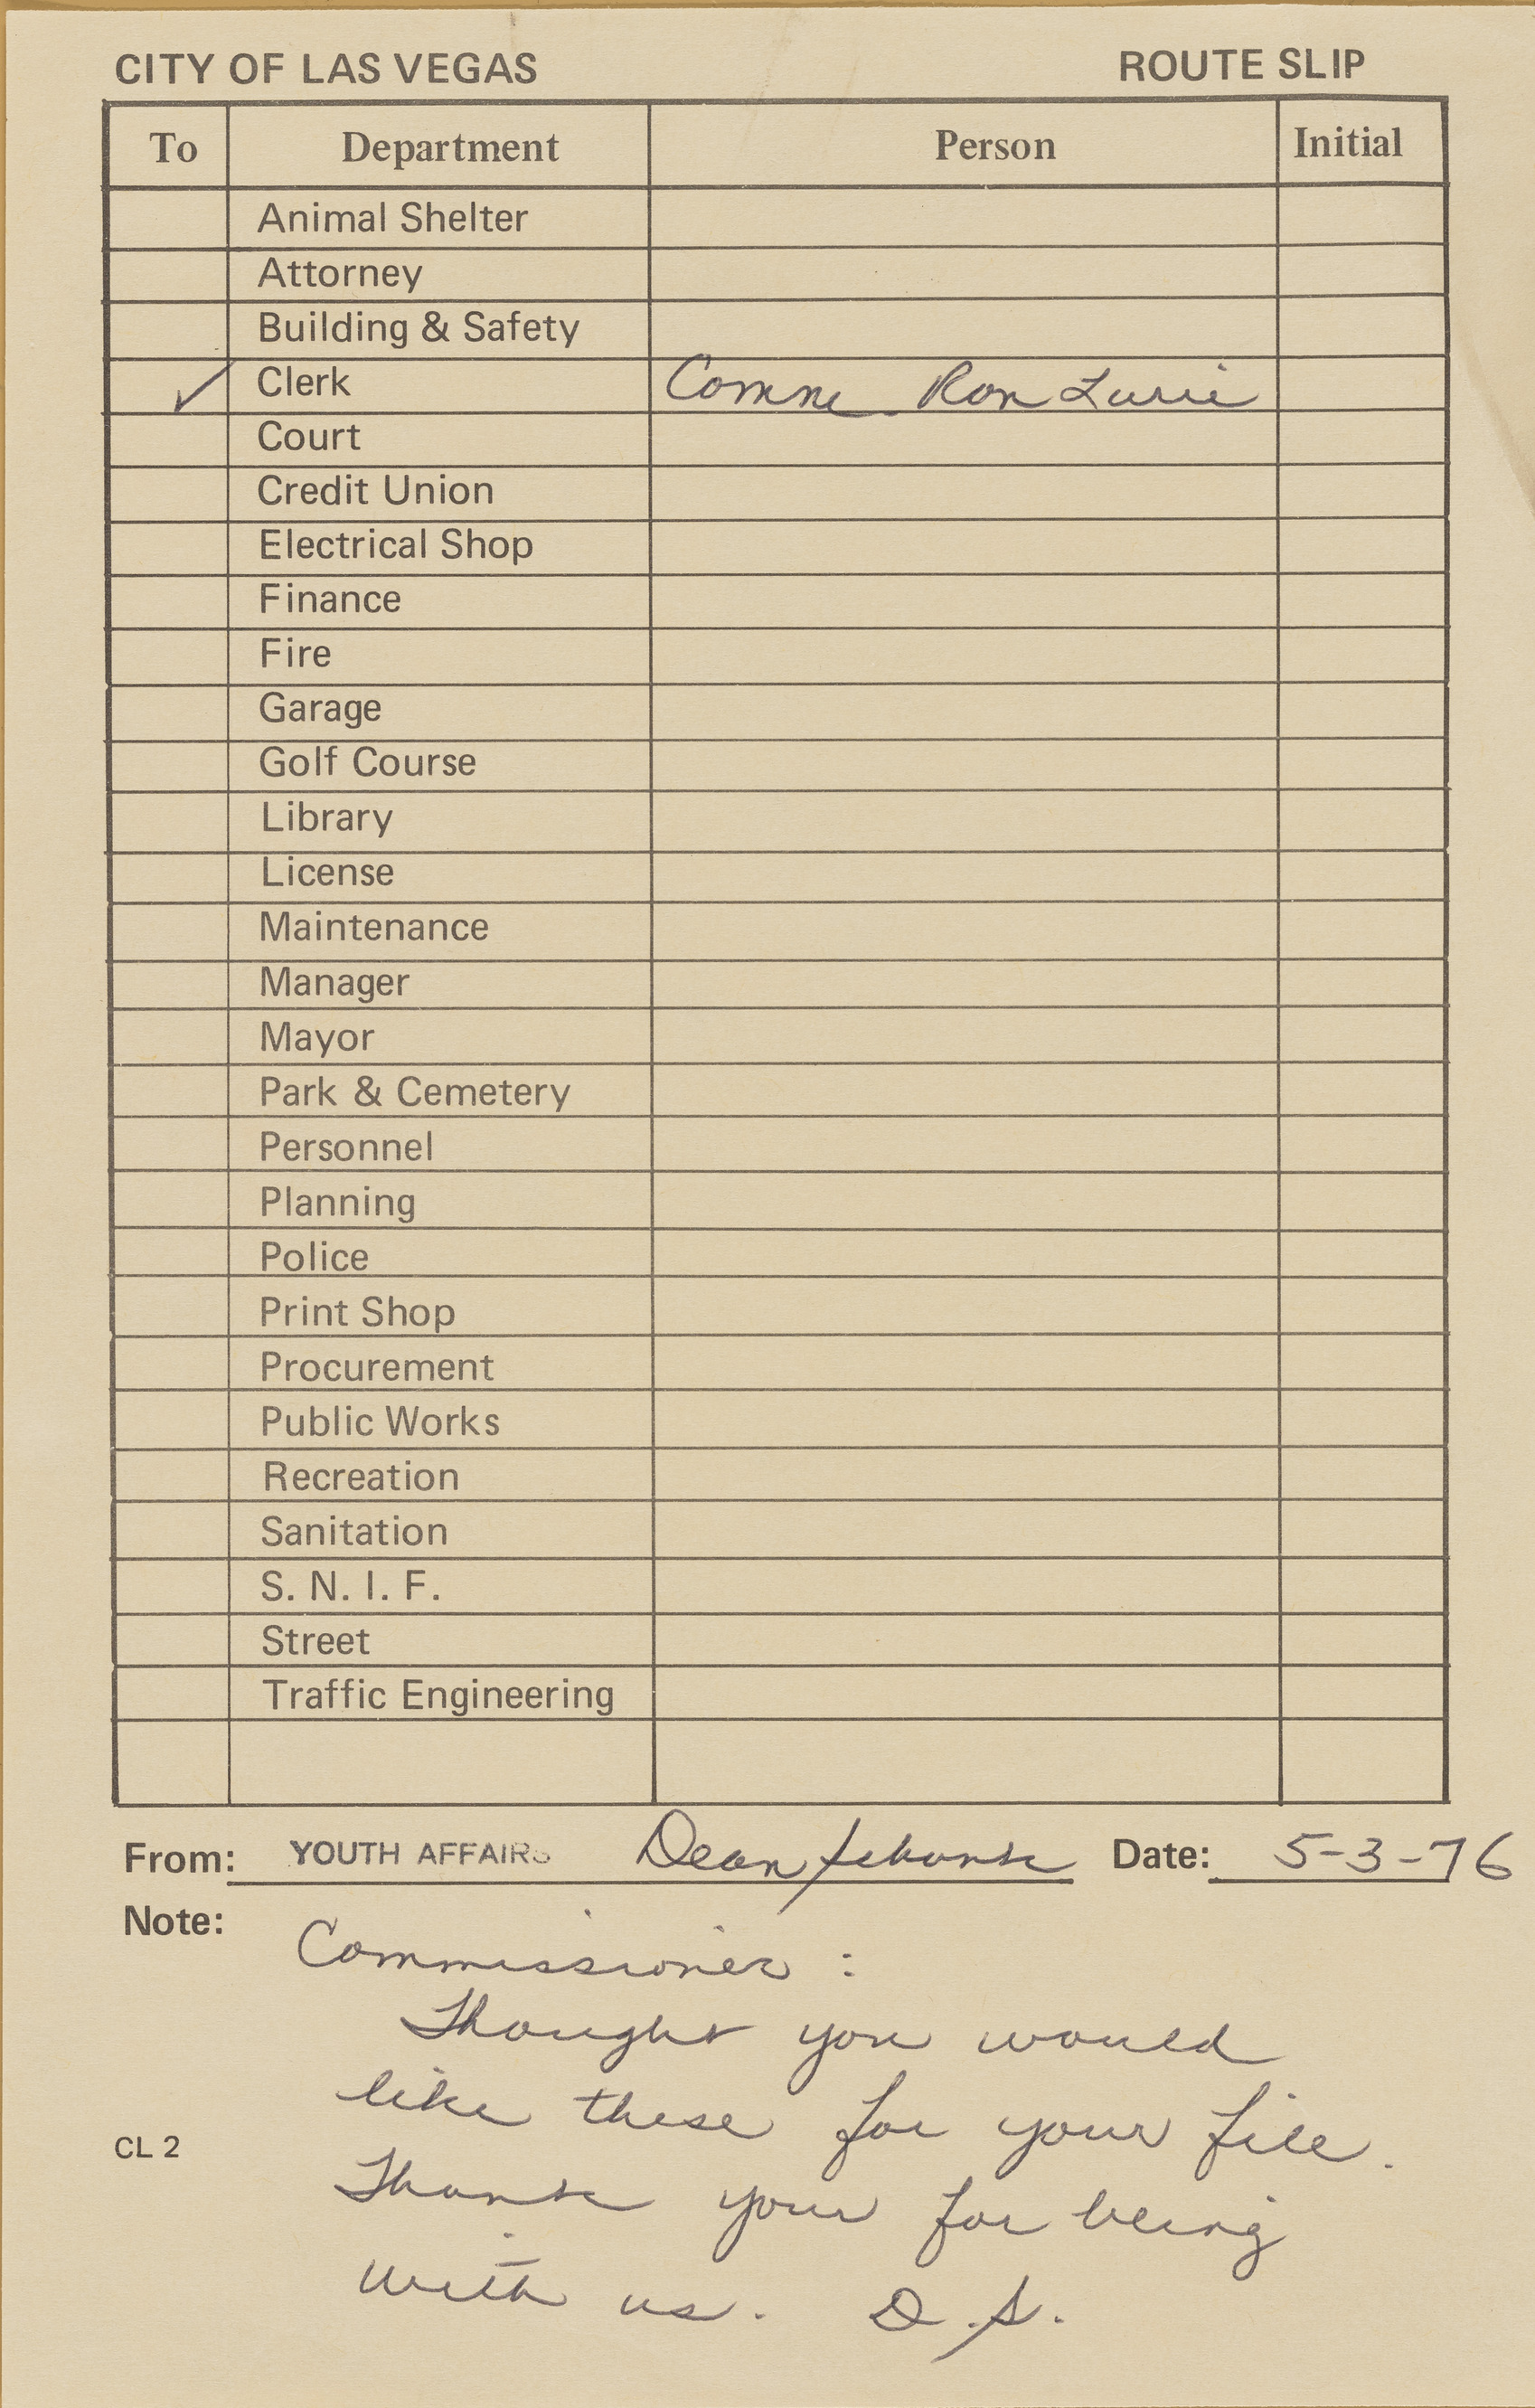 Route slip for photograph to Commissioner Ron Lurie, May 3, 1976